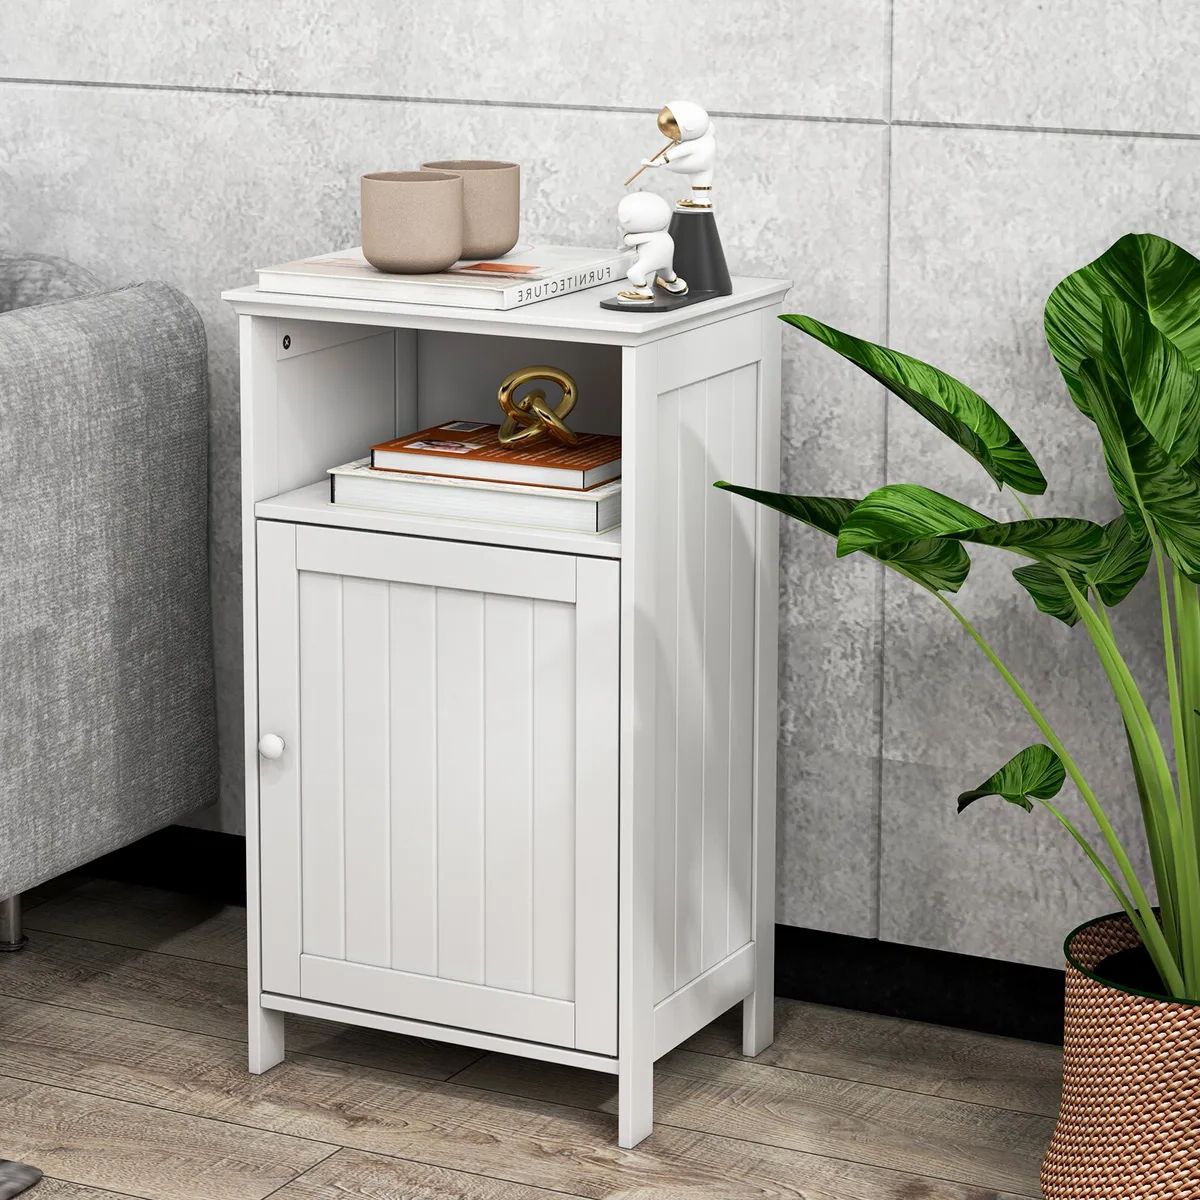 Bathroom Floor Storage Cabinet Side Table Adjustable Shelf Organize  Freestanding | Ebay In Freestanding Tables With Drawers (Gallery 14 of 20)